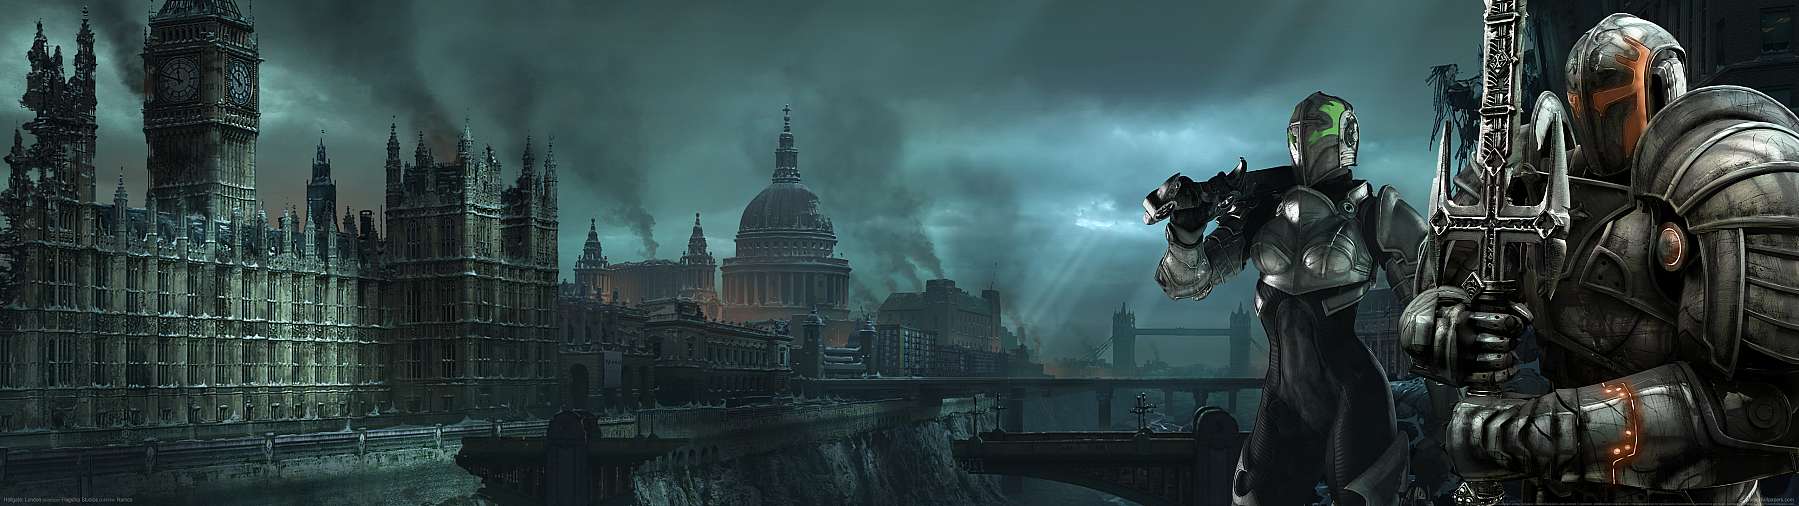 Hellgate: London superwide wallpaper or background 22